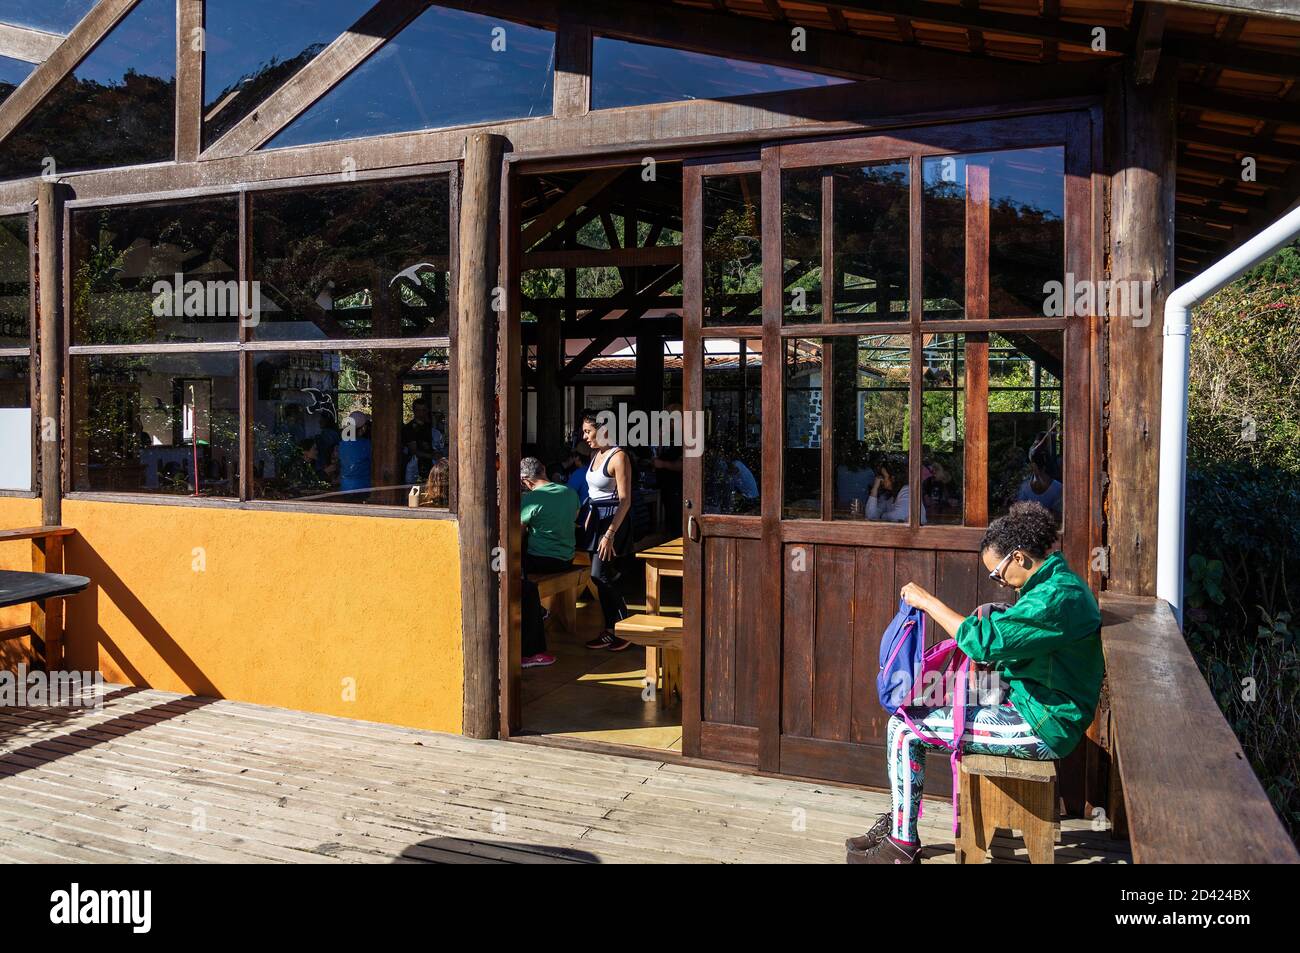 The outdoor porch located at the back of the dining hall of Wolkenburg brewery, where costumers can enjoy the stunning view outside. Stock Photo